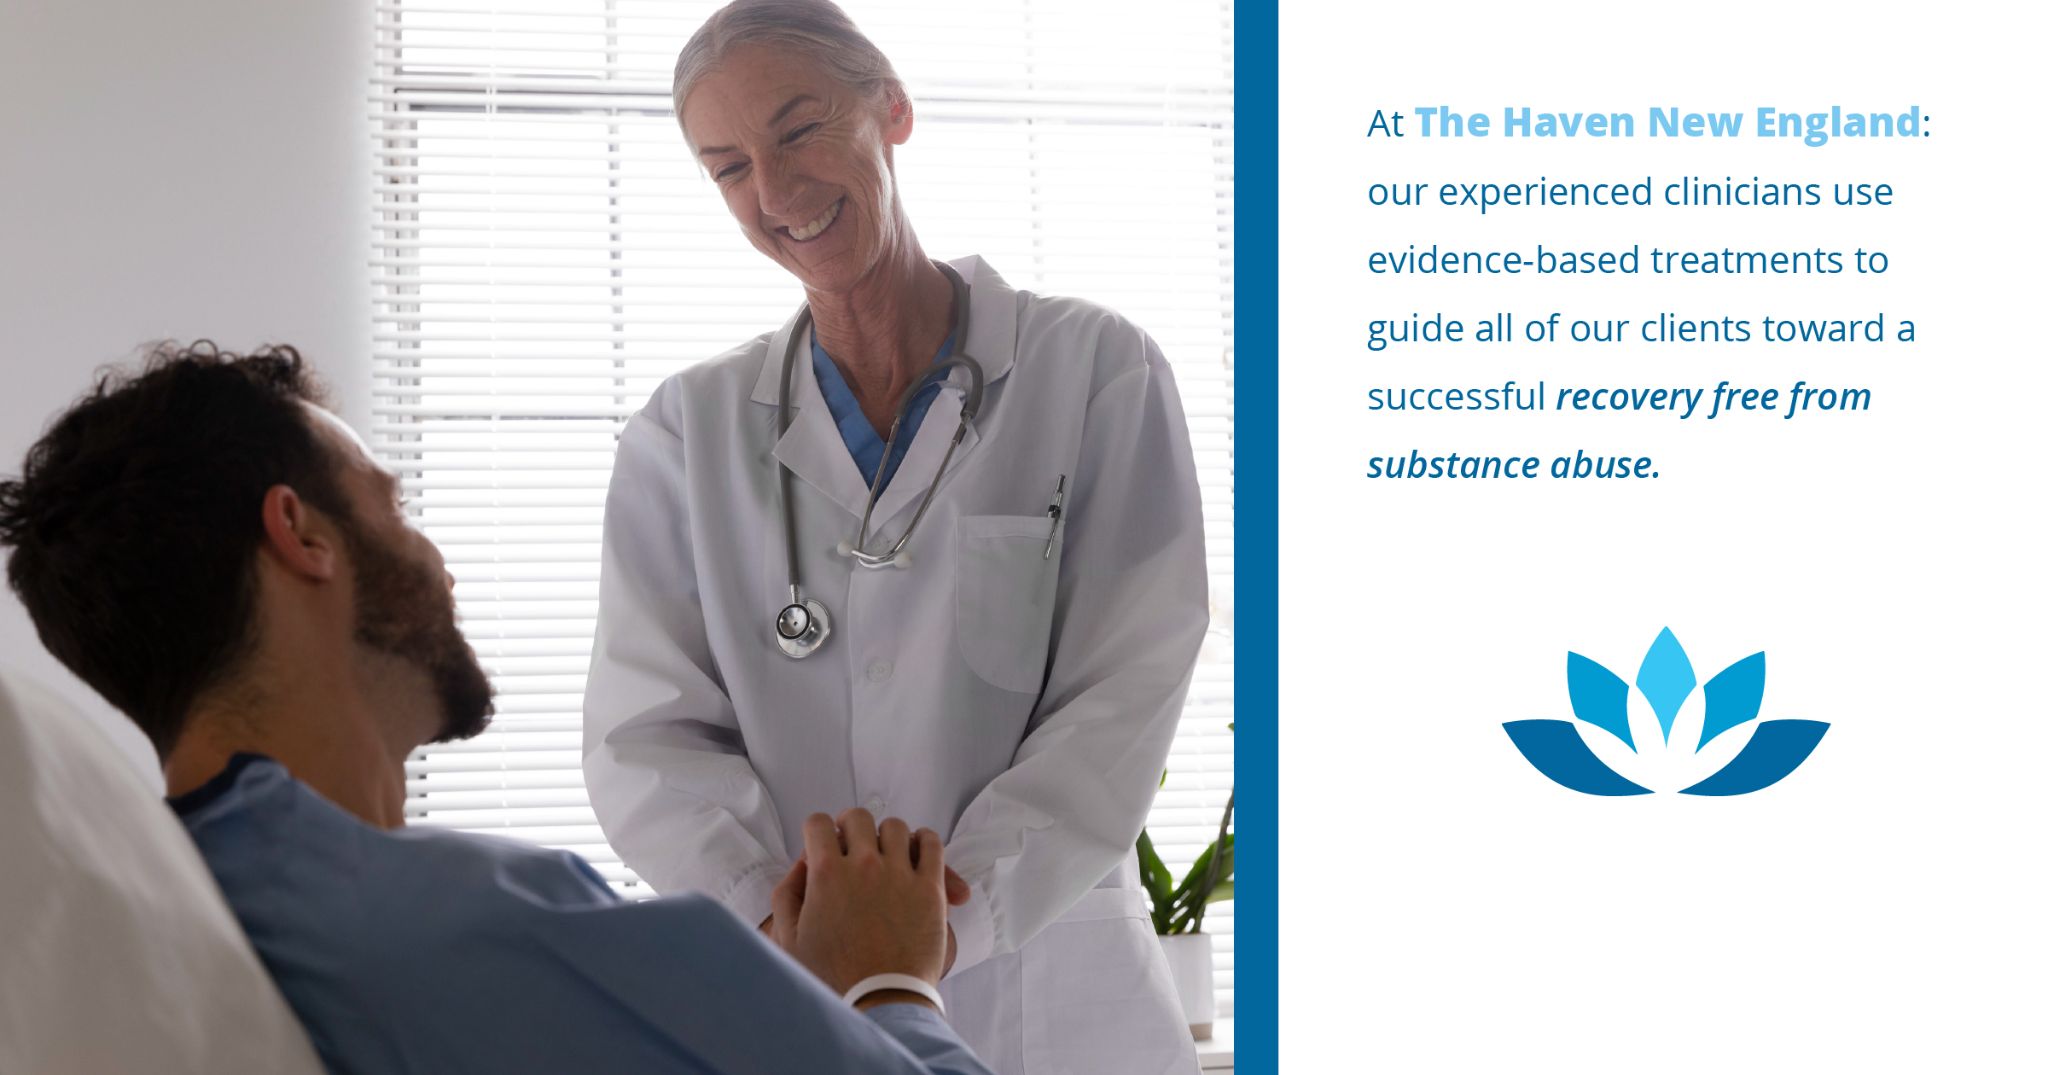 At The Haven New England; Our experience clinicians use evidence based treatments to guide all of our clients toward a successful recovery free from substance abuse